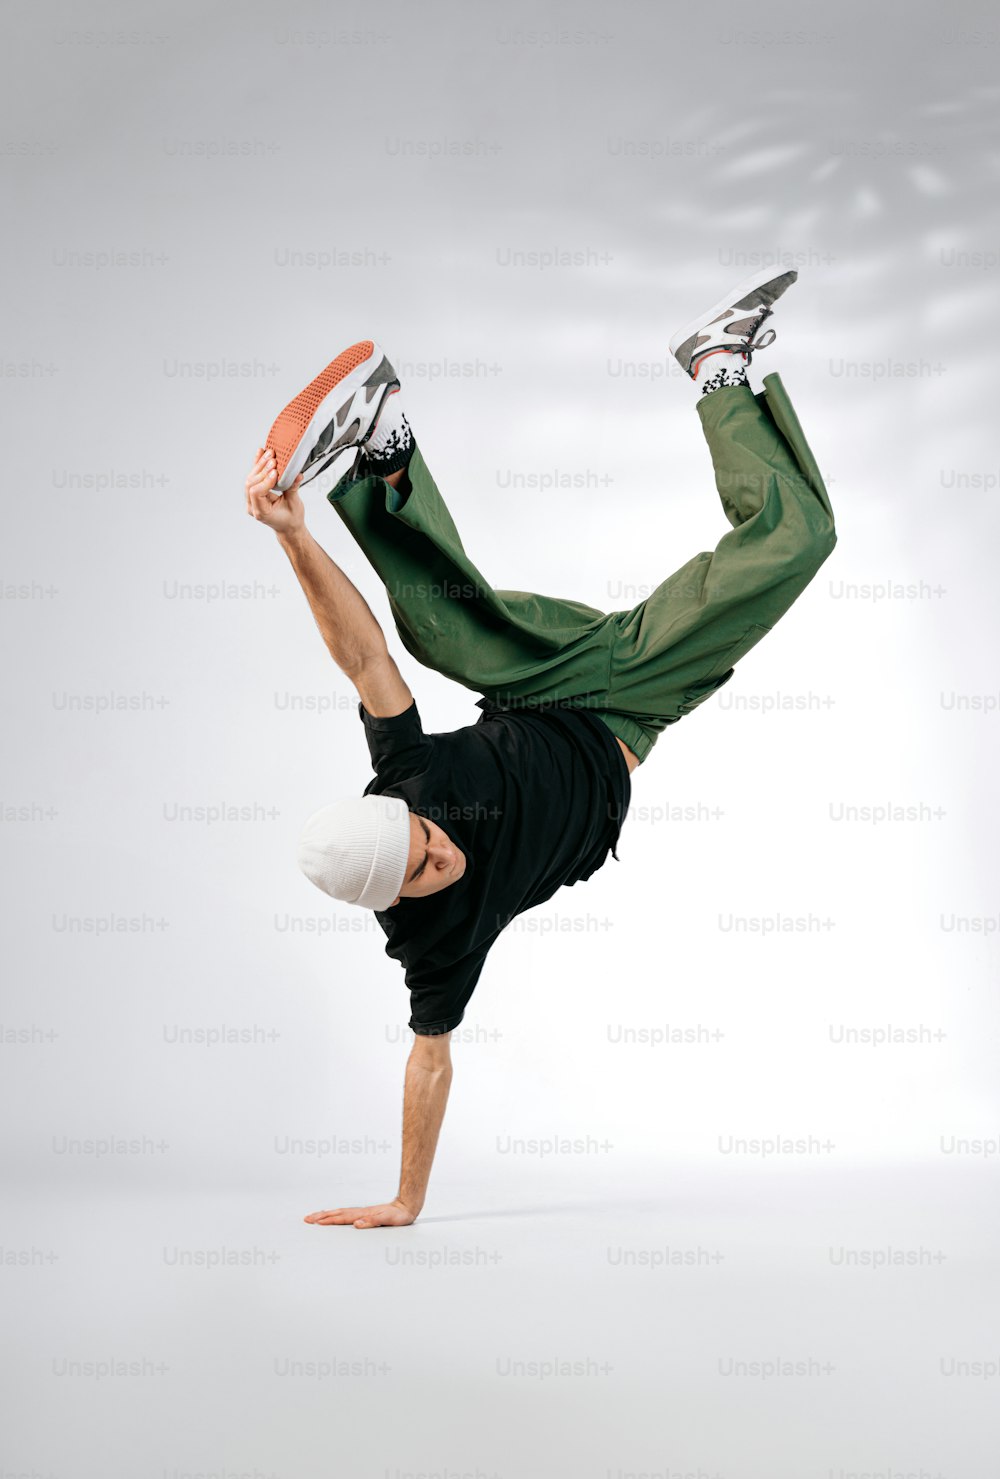 a man doing a handstand with a frisbee